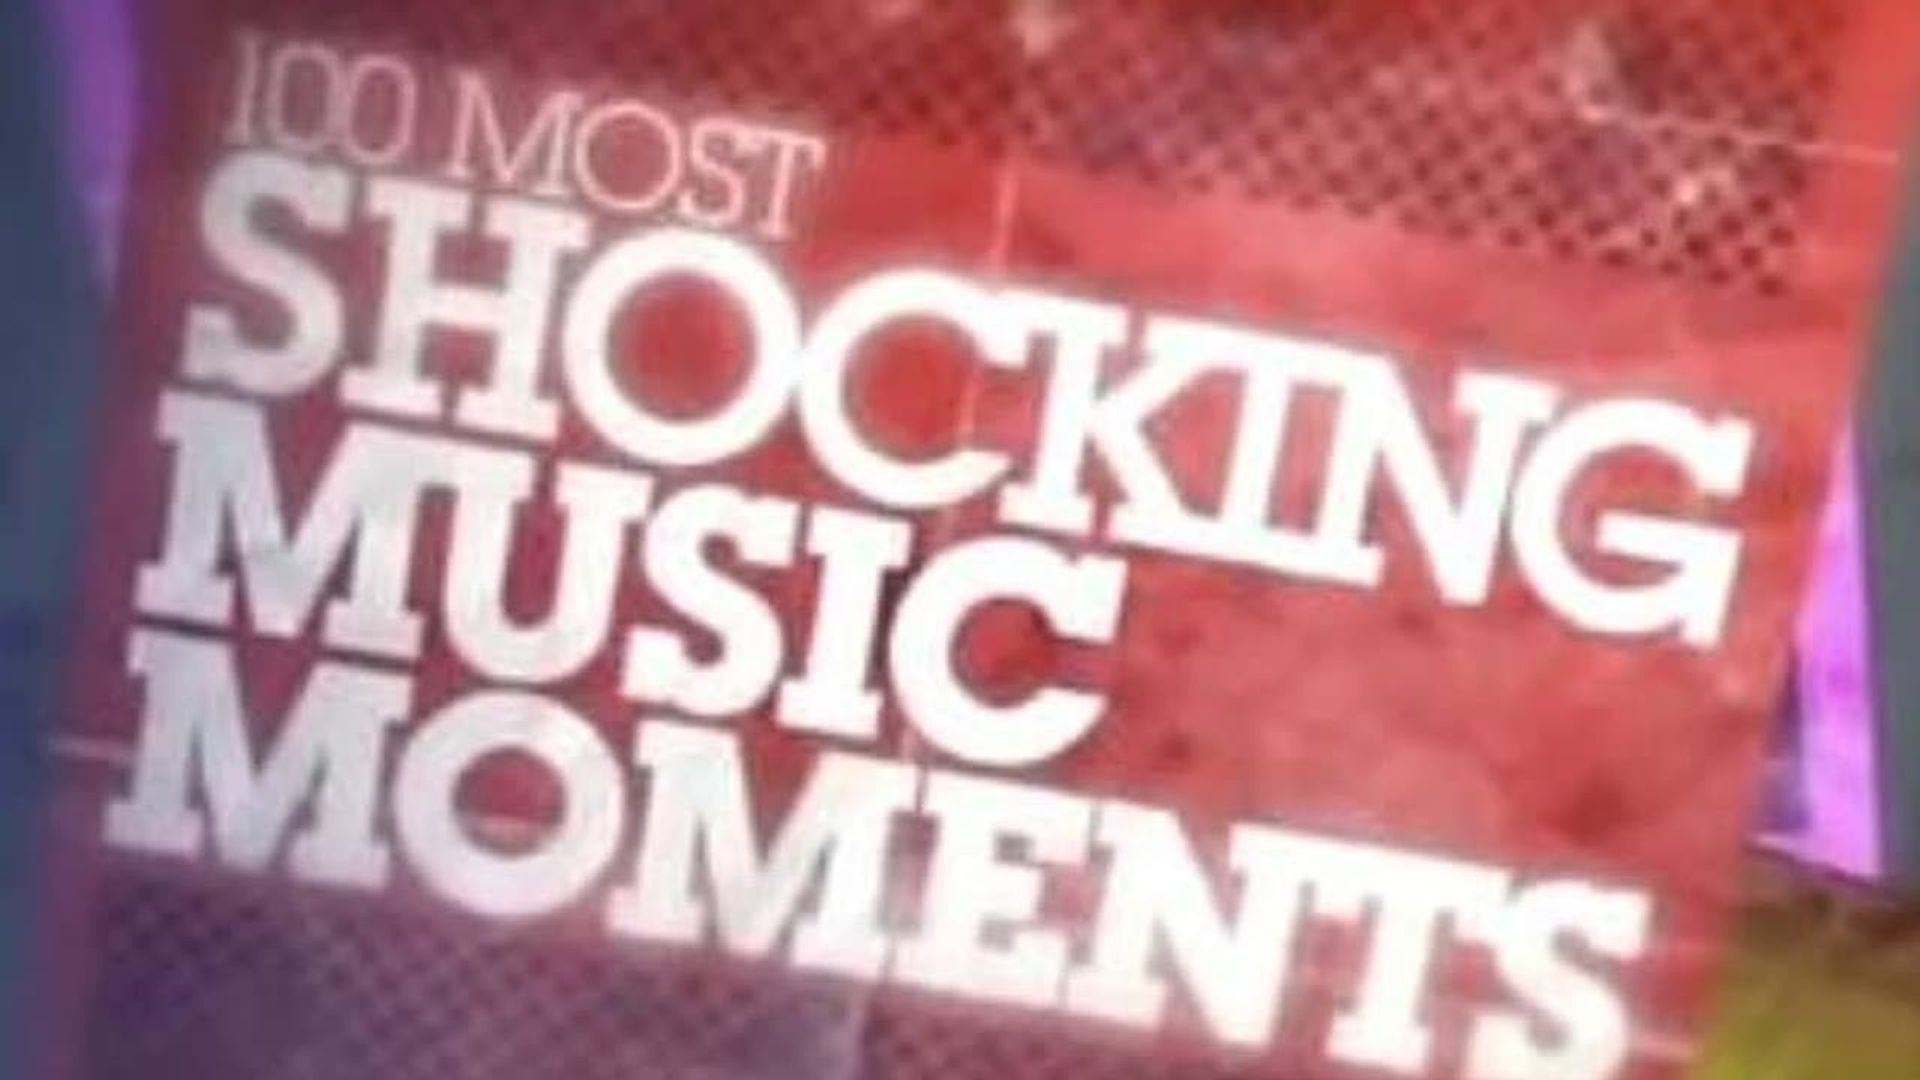 100 Most Shocking Music Moments background